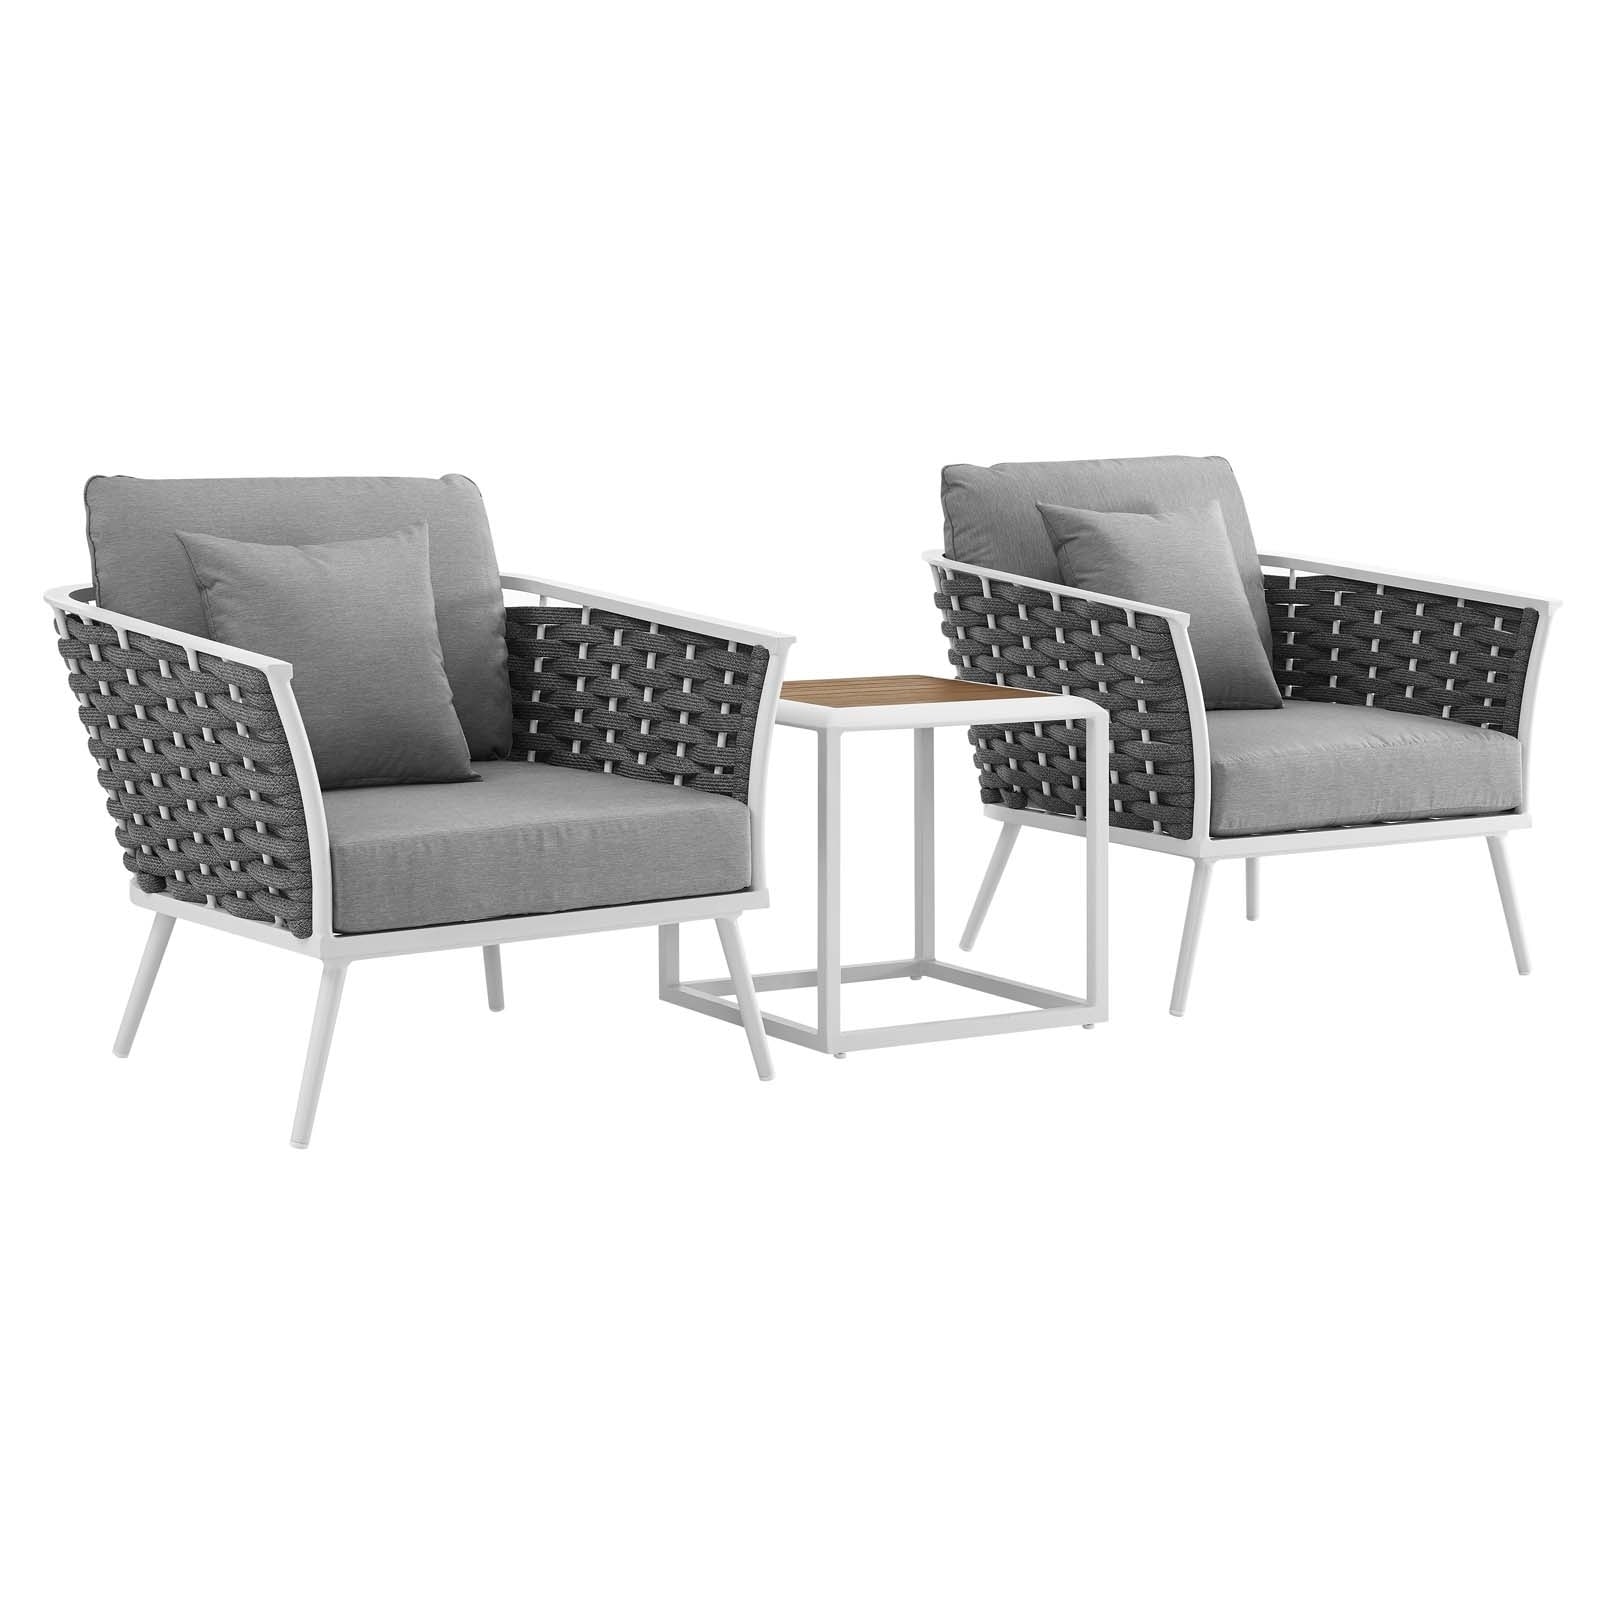 Stance 3 Piece Outdoor Patio Aluminum Sectional Sofa Set - N/a